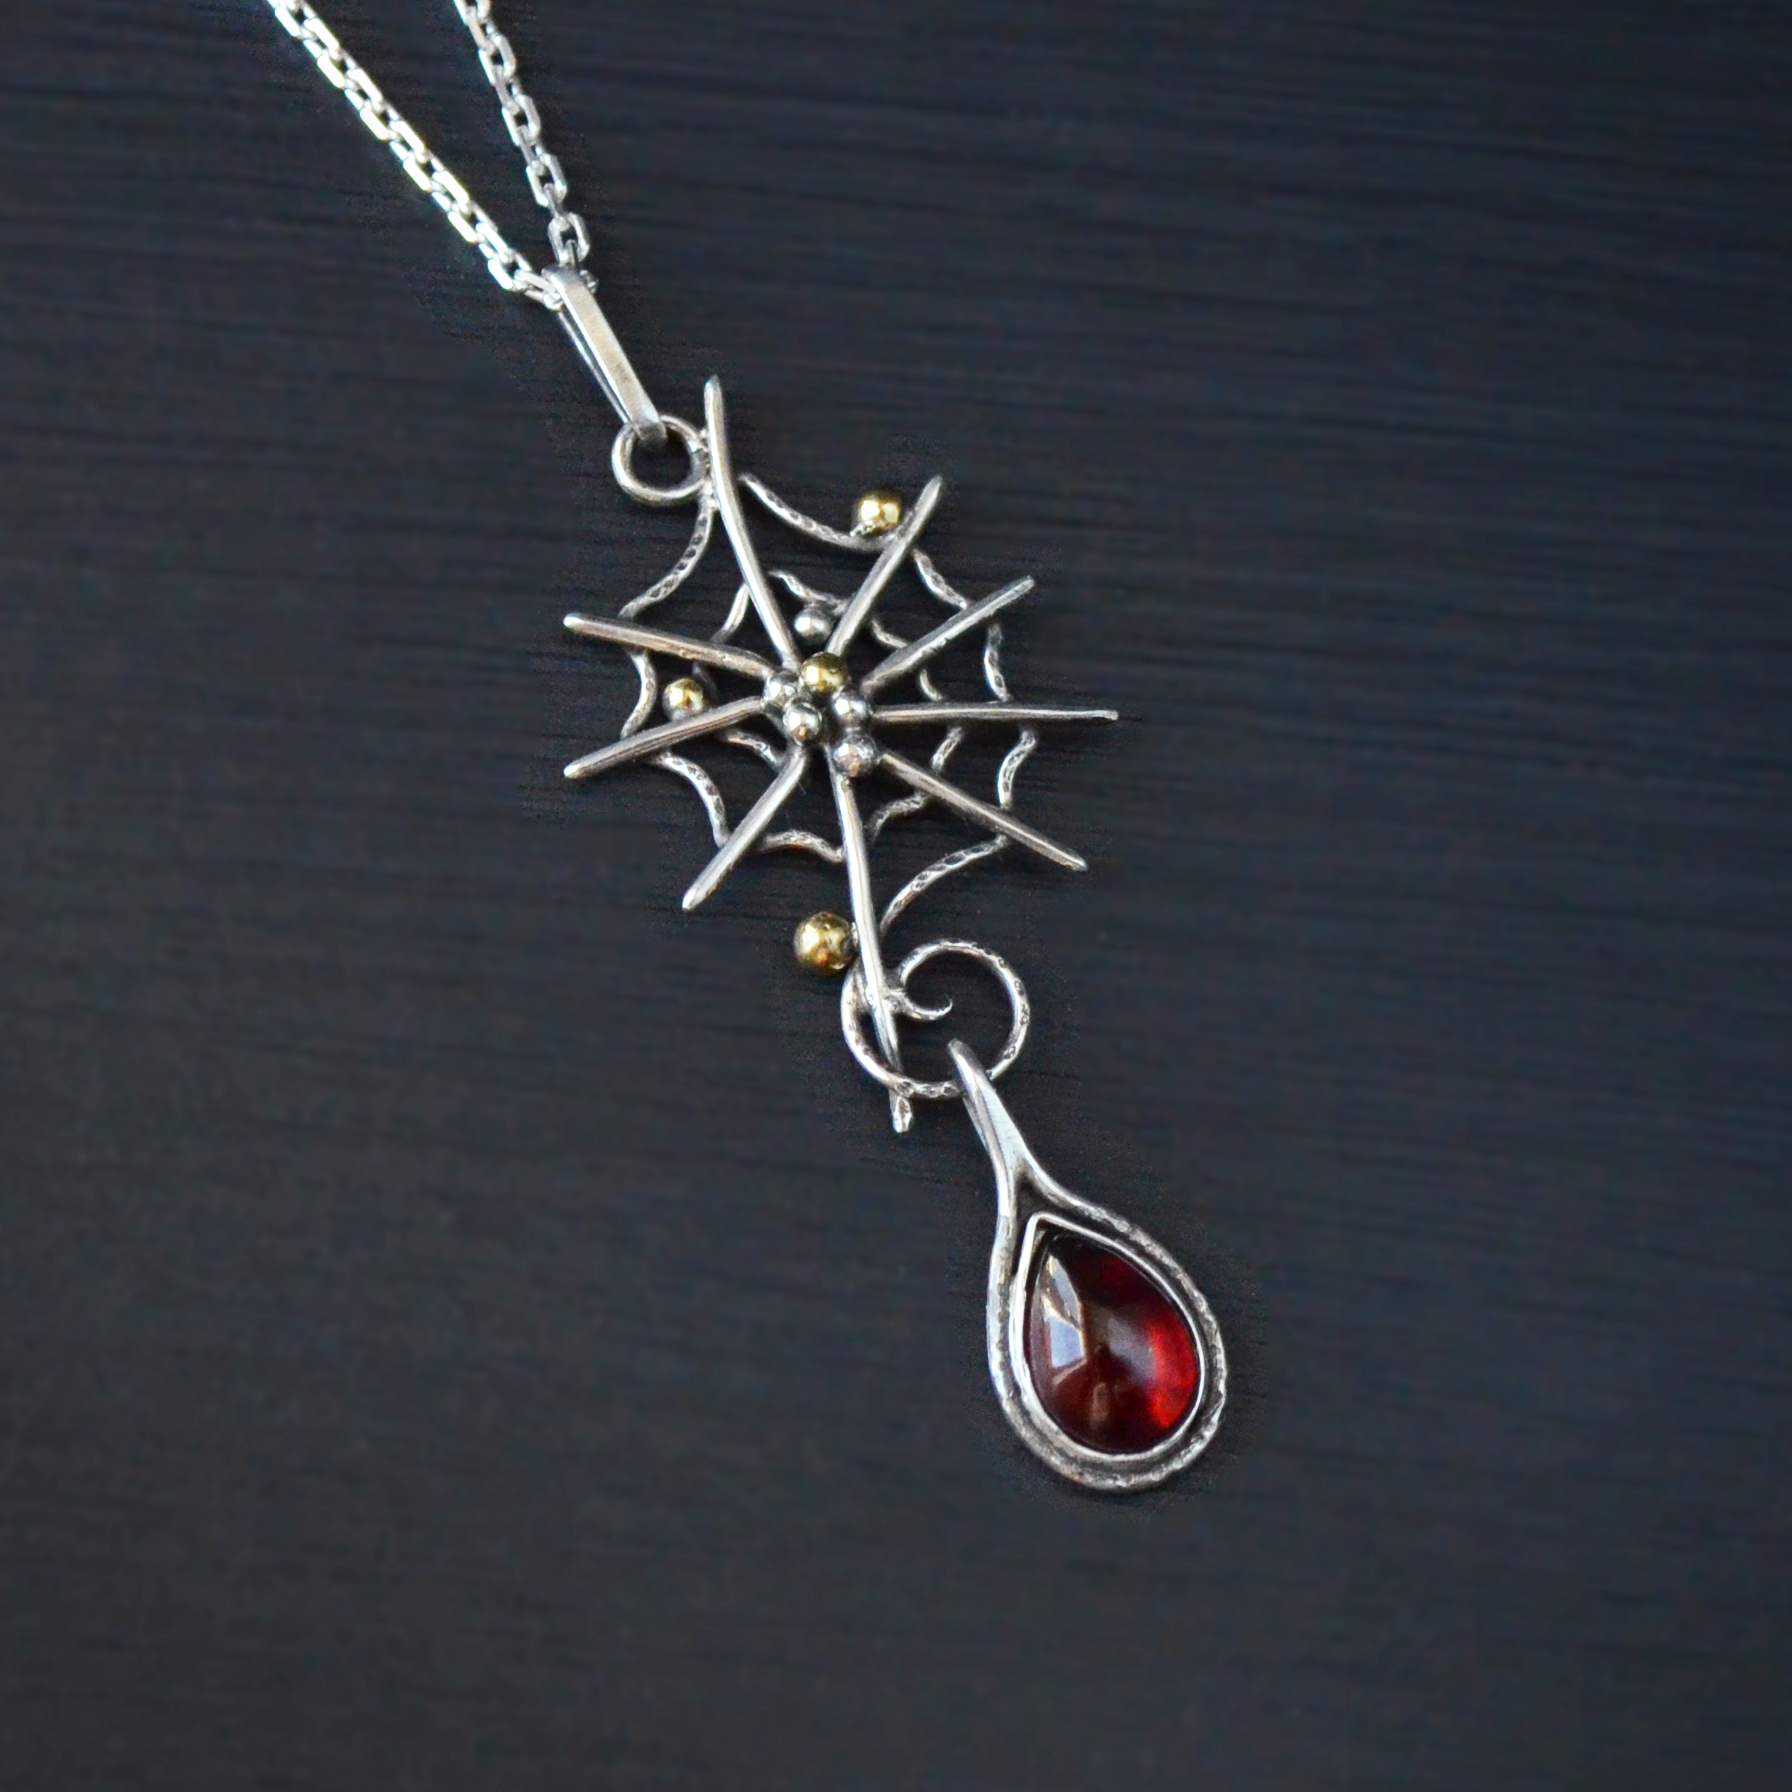 Spider web necklace with garnet drop Amazing gift for gothic girl